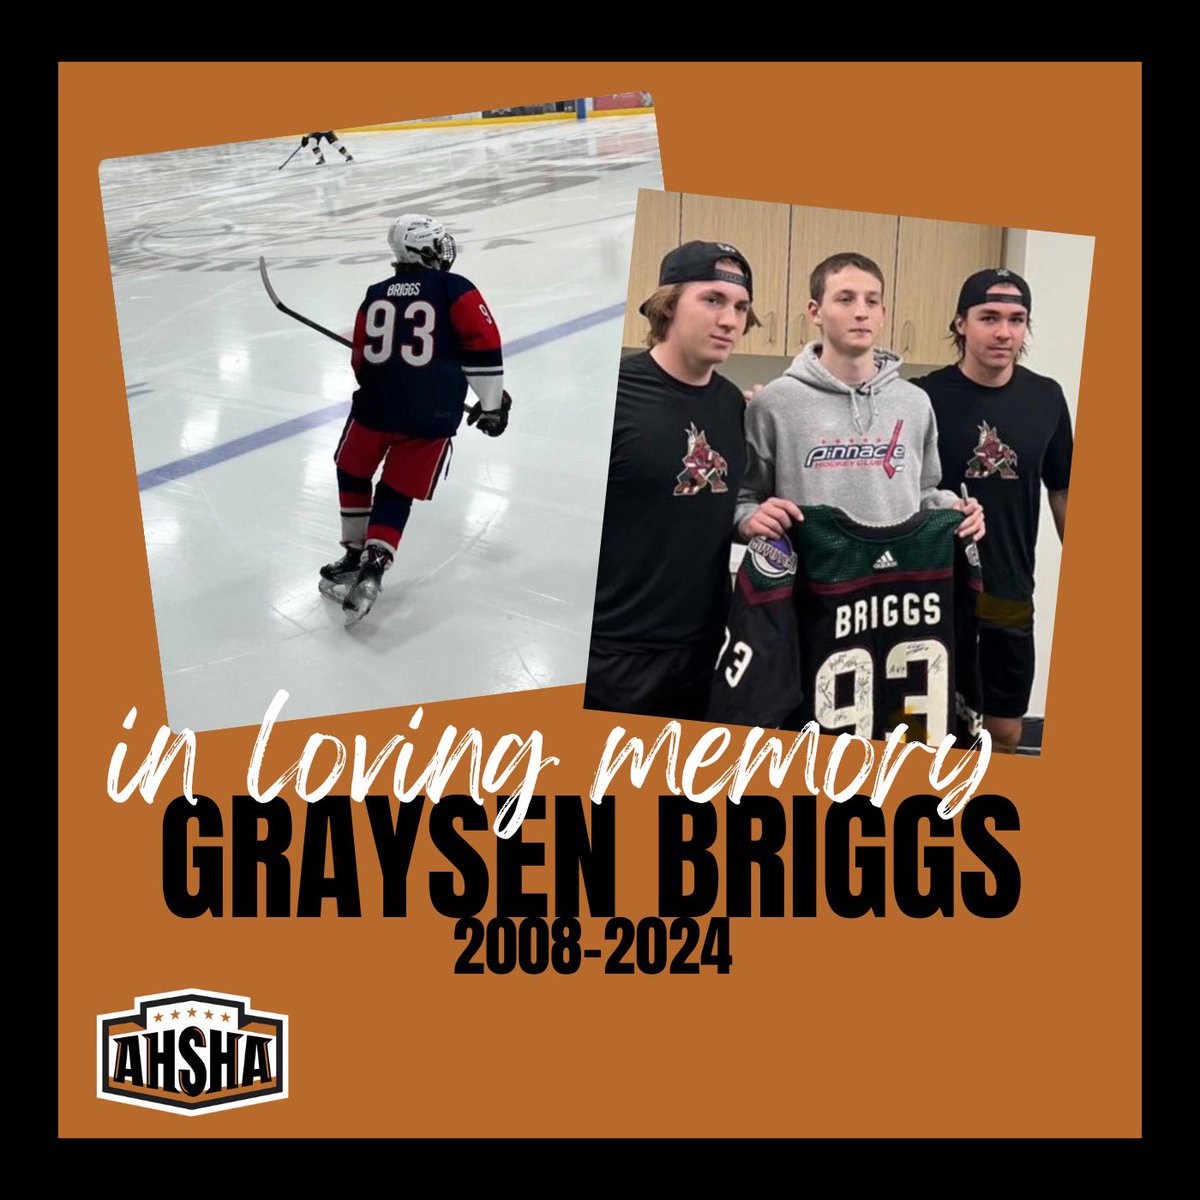 The AHSHA community is deeply saddened by the loss of one of our own, Graysen Briggs. We are so grateful for Graysen and the impact he had on the Pinnacle Pioneers and AHSHA community. Graysen will be dearly missed by our entire Arizona hockey family.